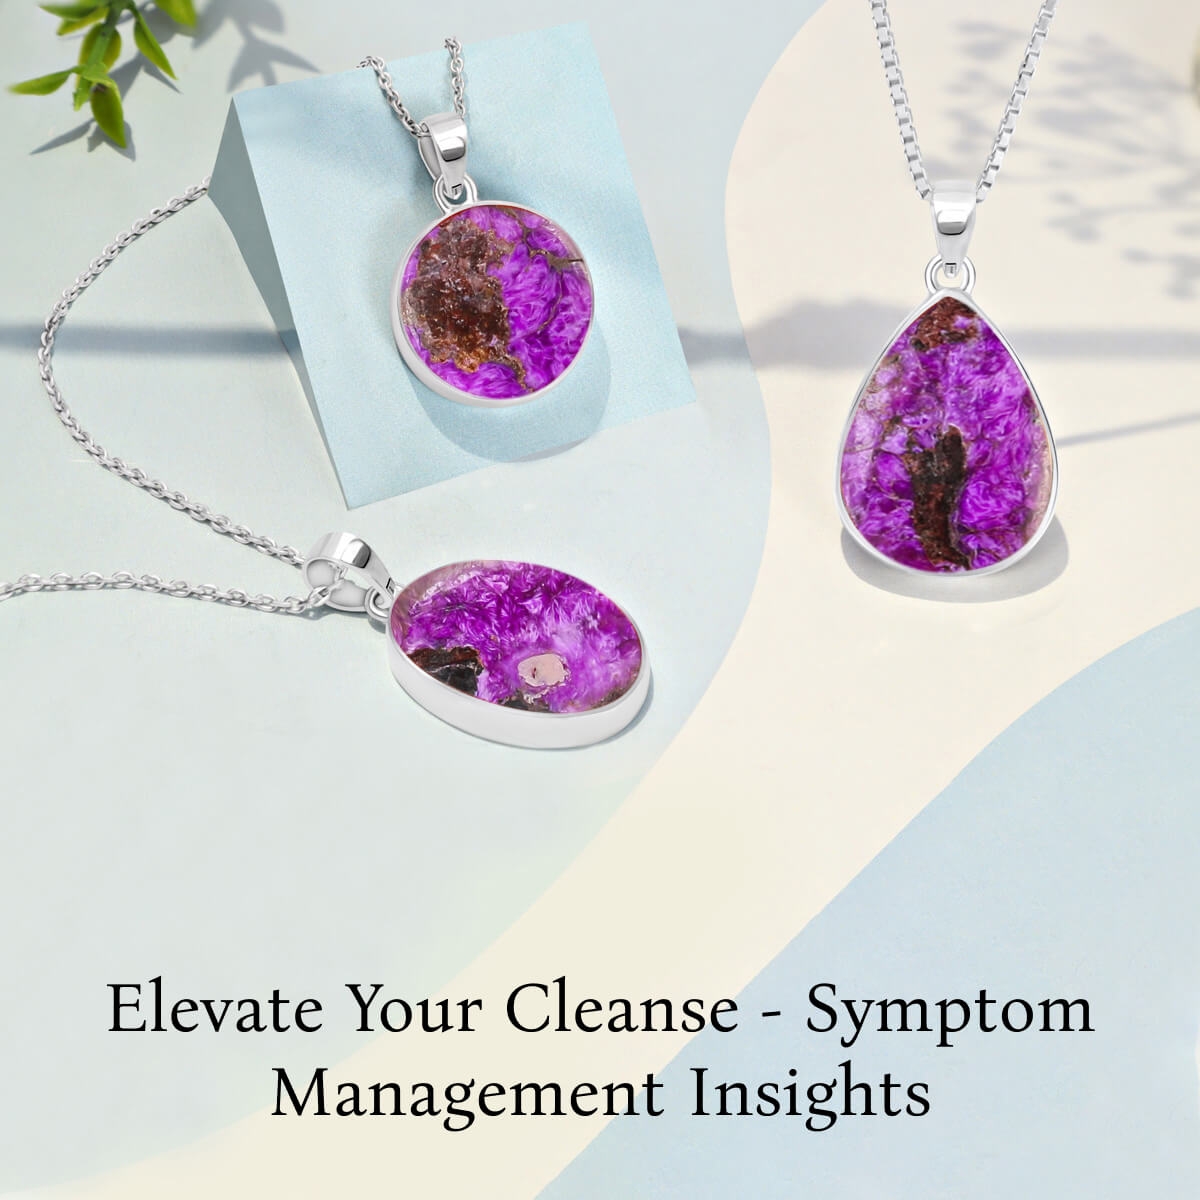 Managing Symptoms and Aiding a Cleansing Program